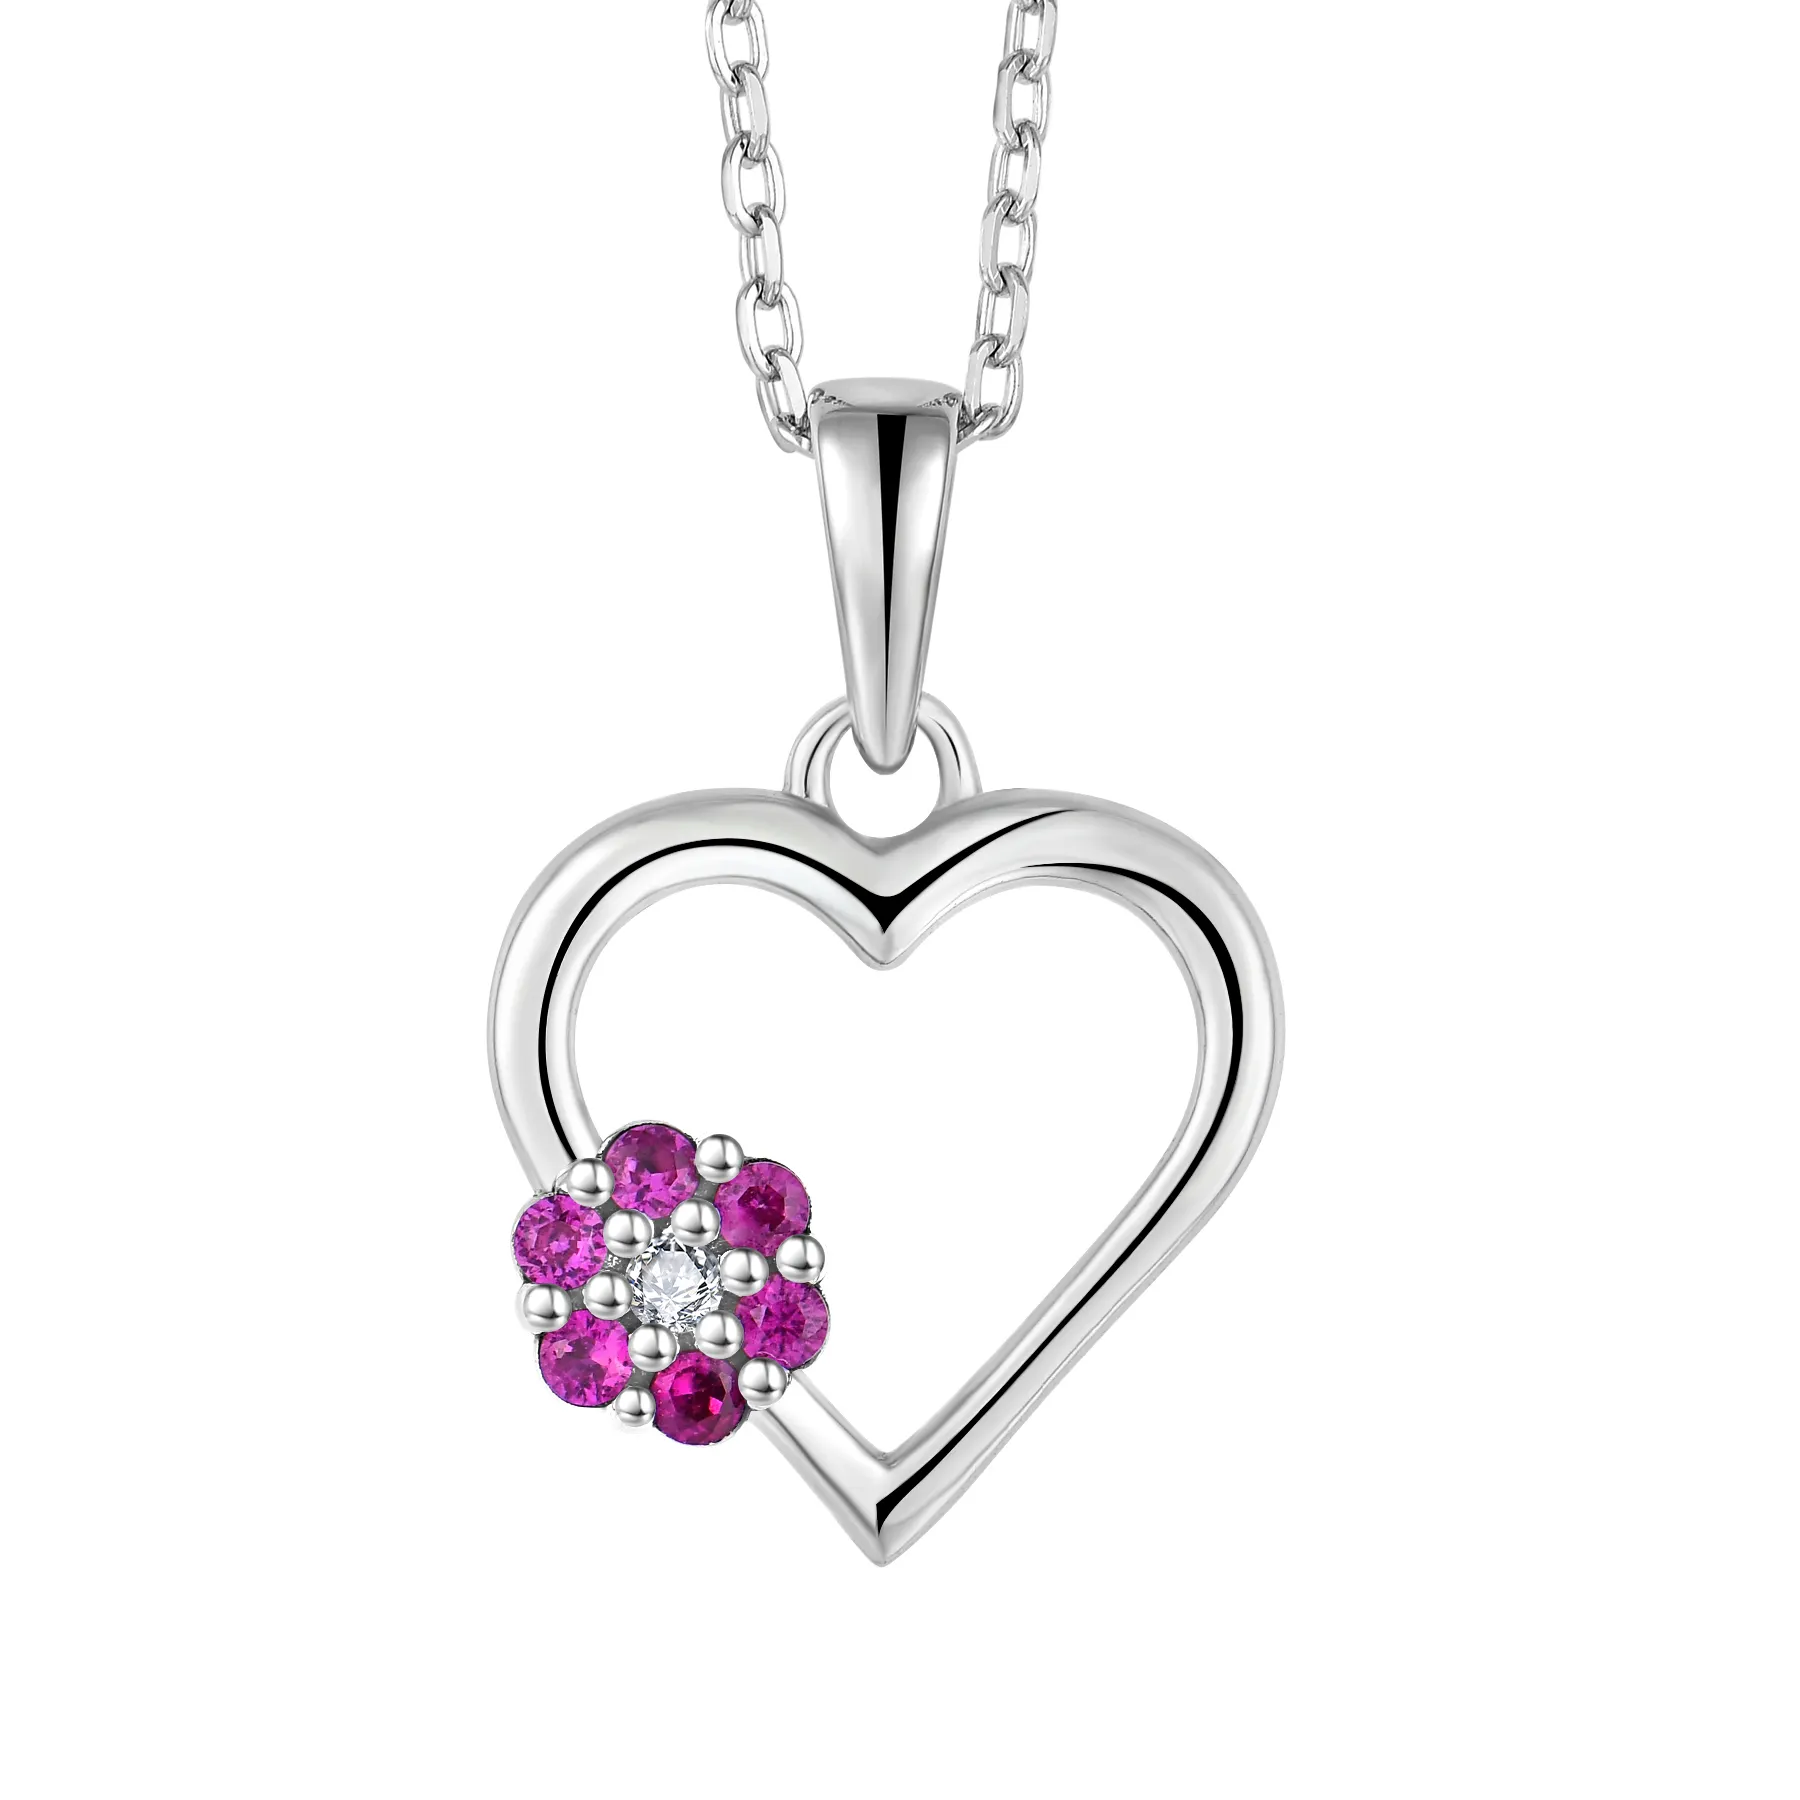 Qingxin 925 Sterling Silver Fine Jewelry Flower Heart Pendant Mother's Day Gift Luv Heart Pendant For Women